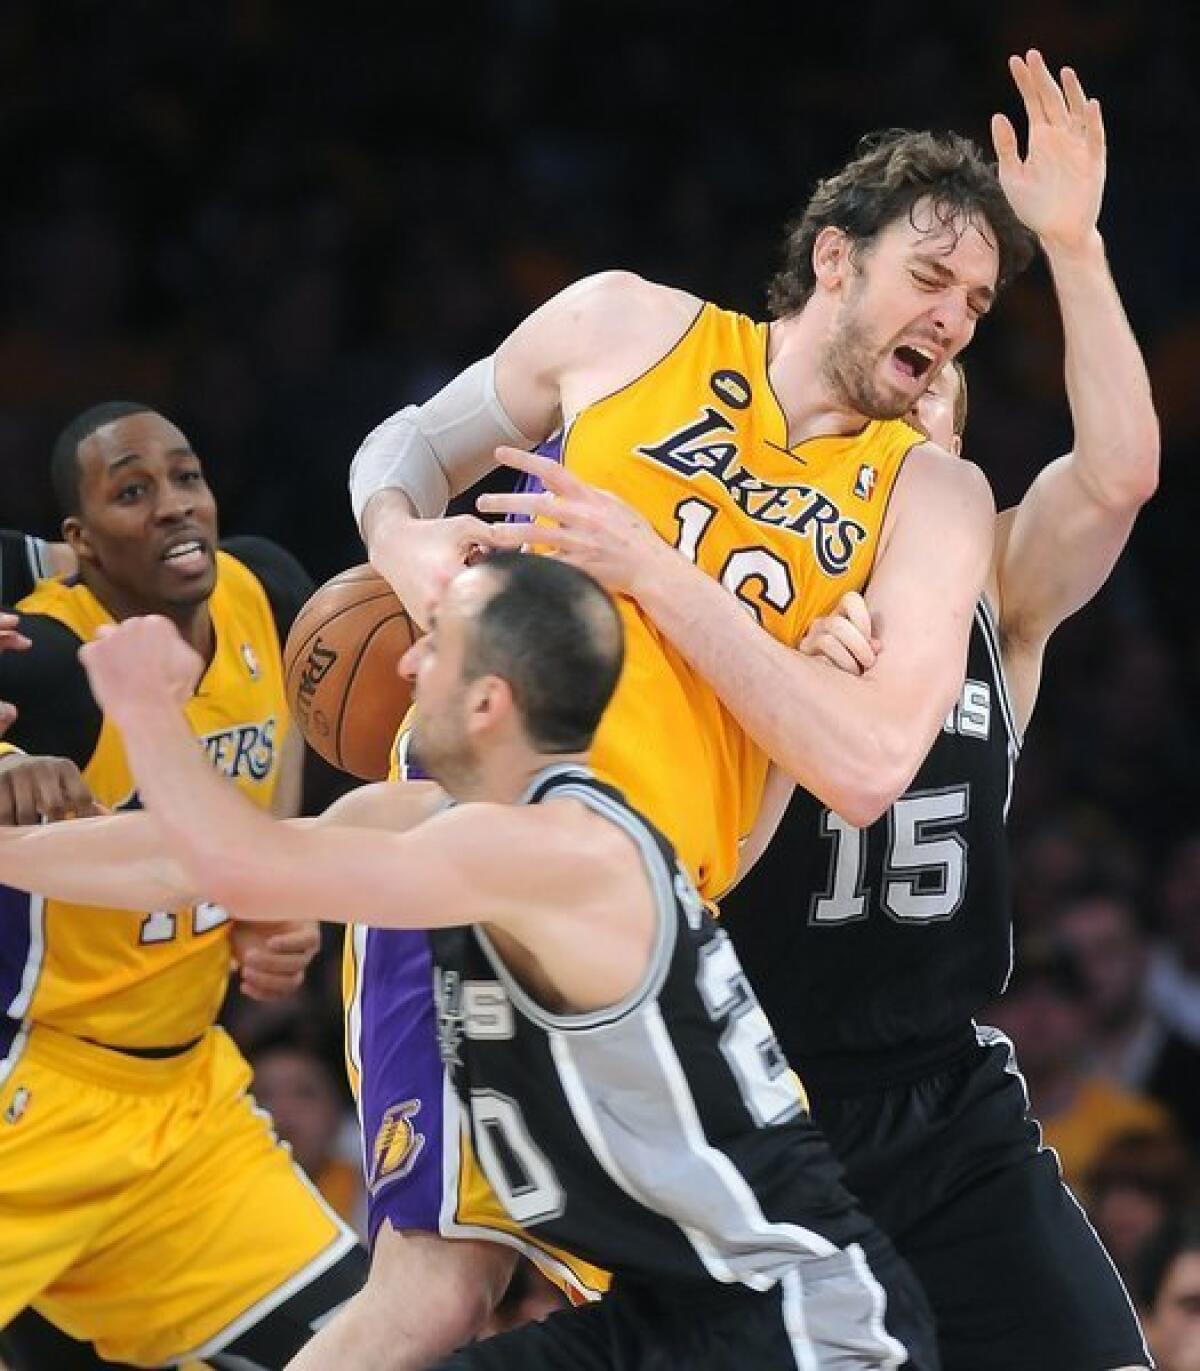 Pau Gasol, top, will undergo a medical procedure to remove scar tissue in both of his knees on Thursday, according to a Lakers release.